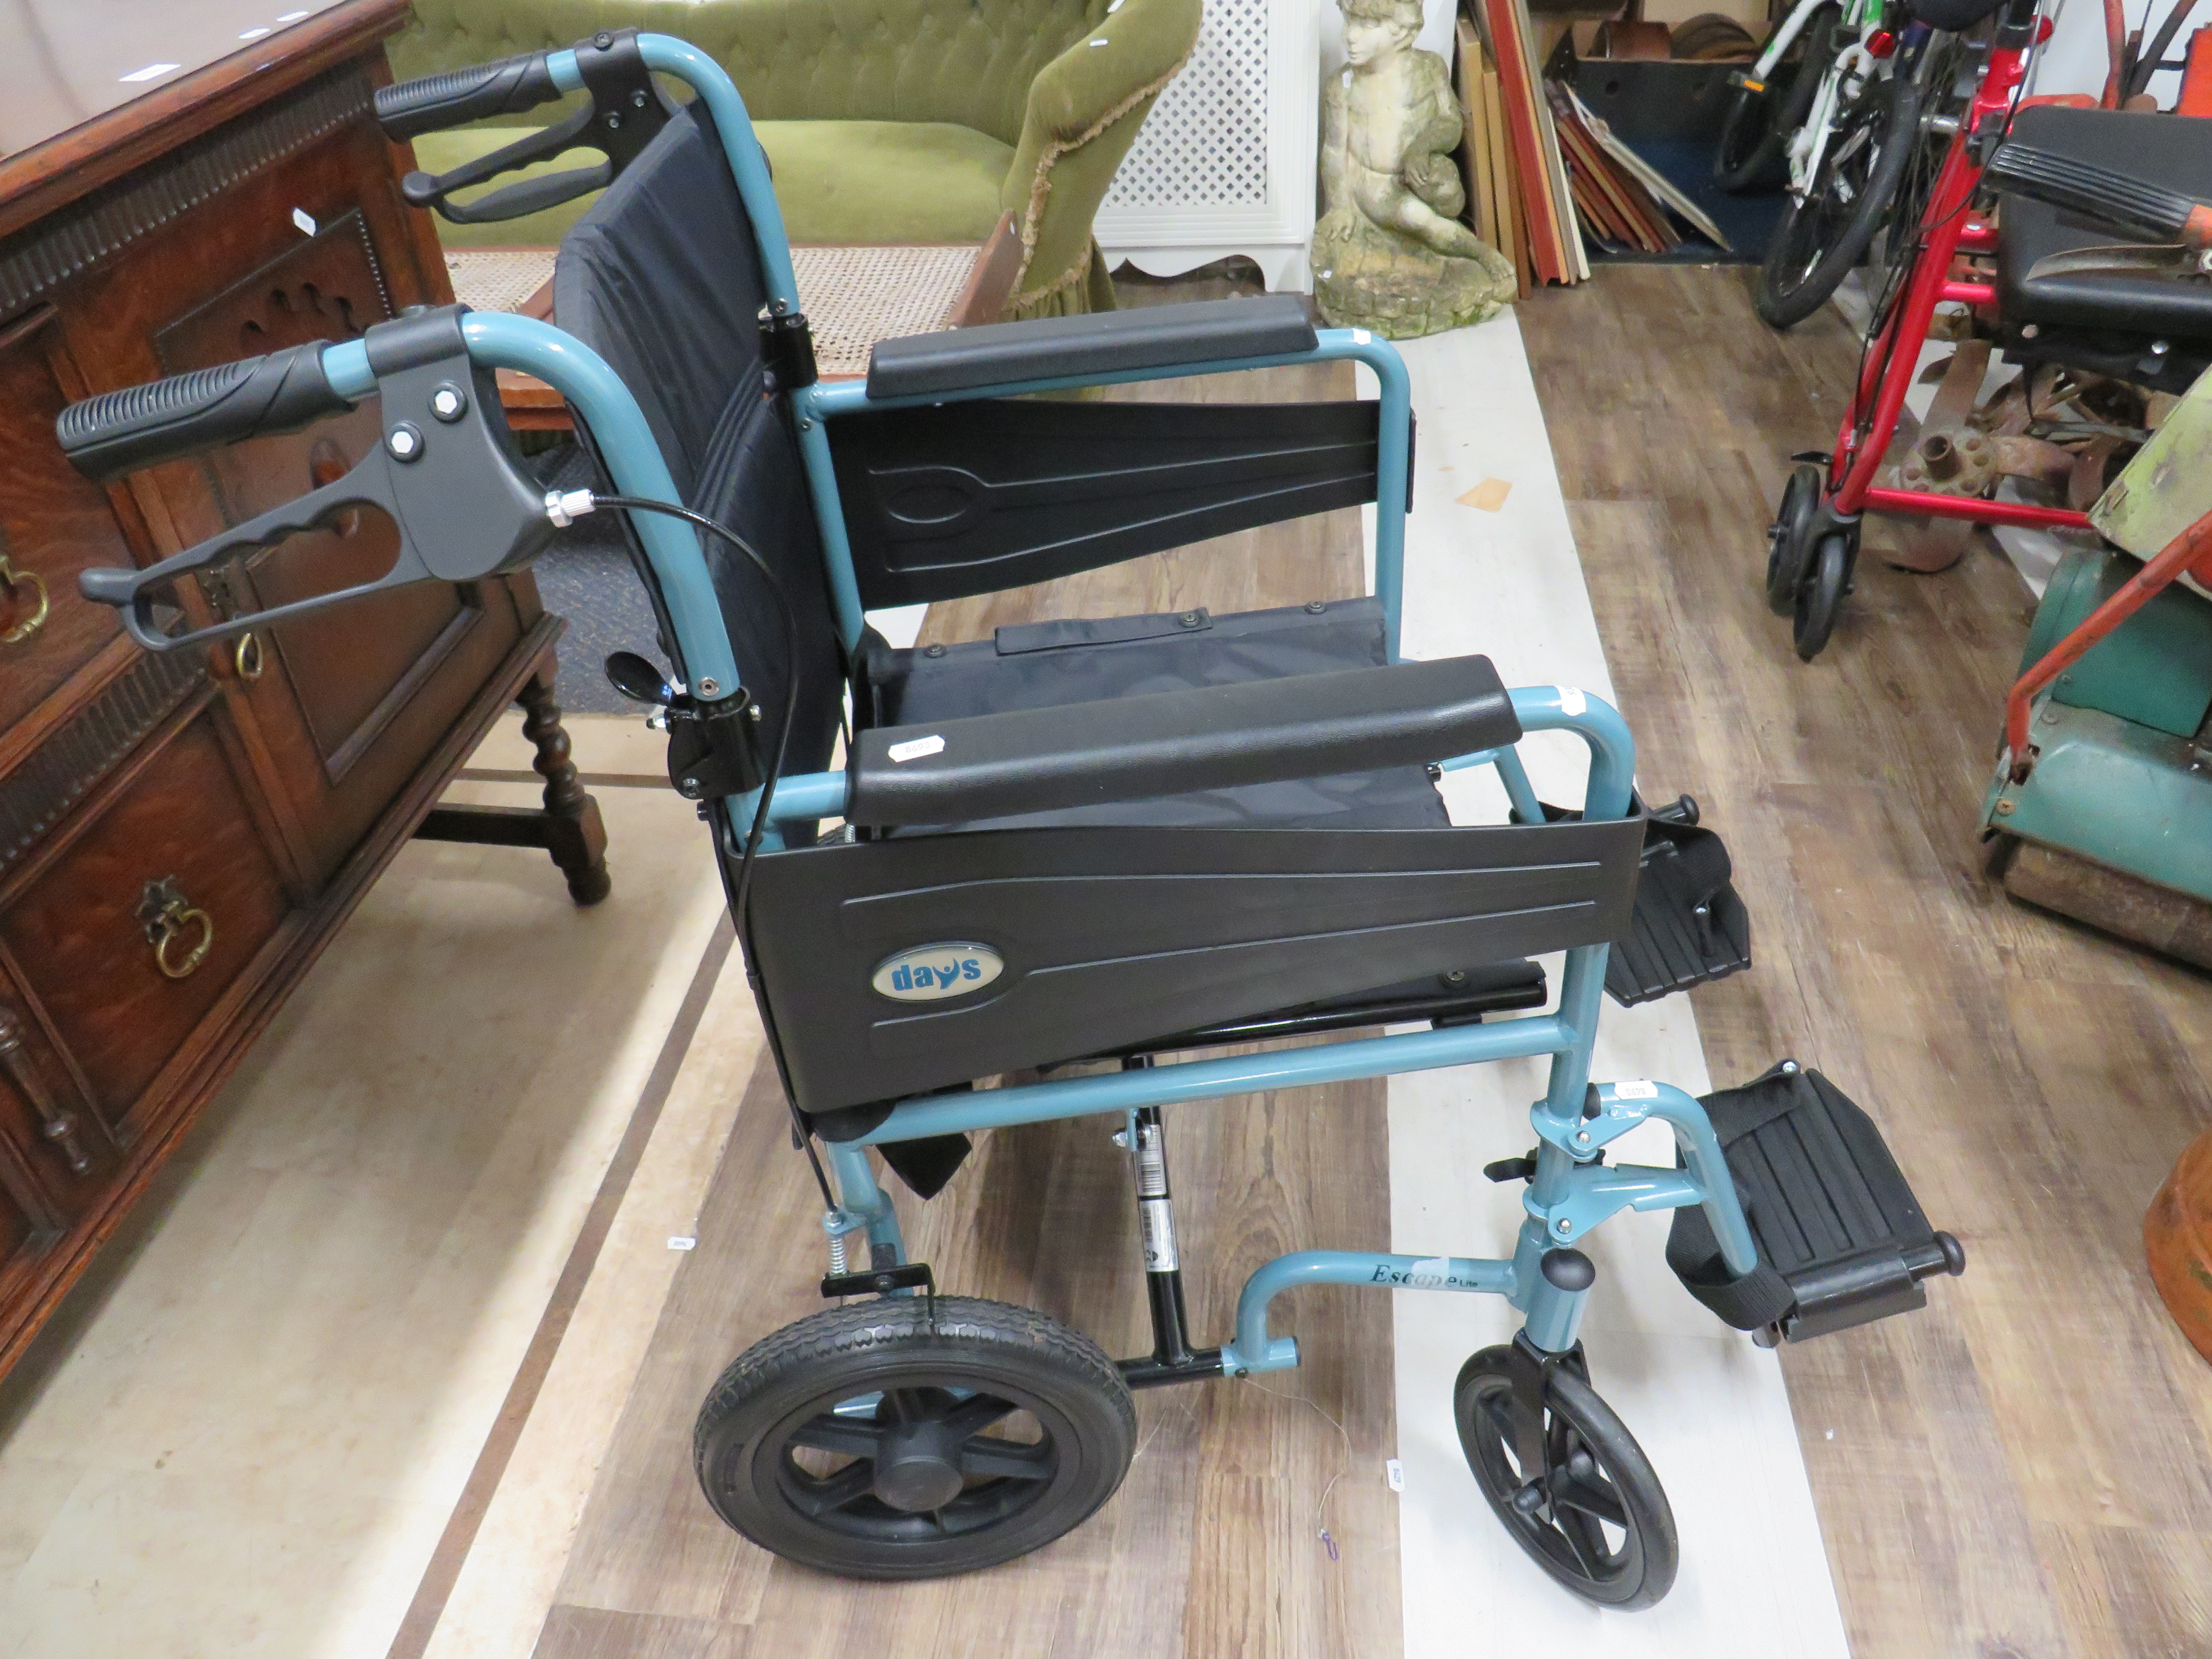 Days Folding wheel chair in excellent condition with handbrakes. Very little use. See photos - Image 2 of 4